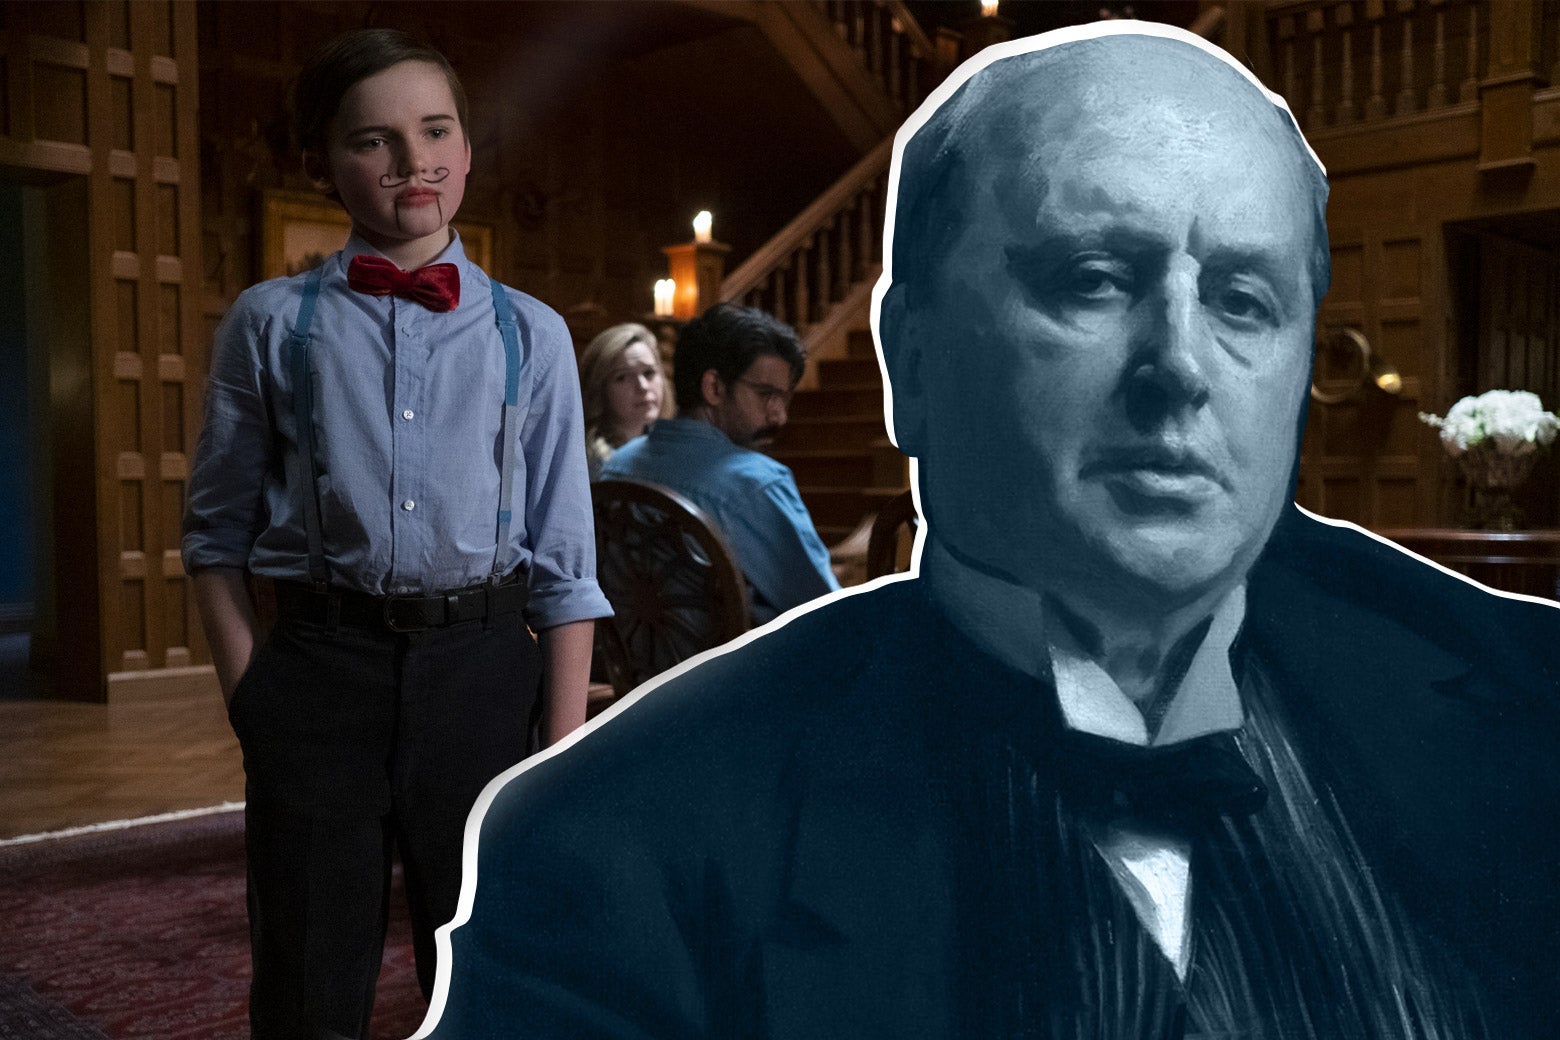 A portrait of Henry James and a still image of Miles in the TV show in the background.